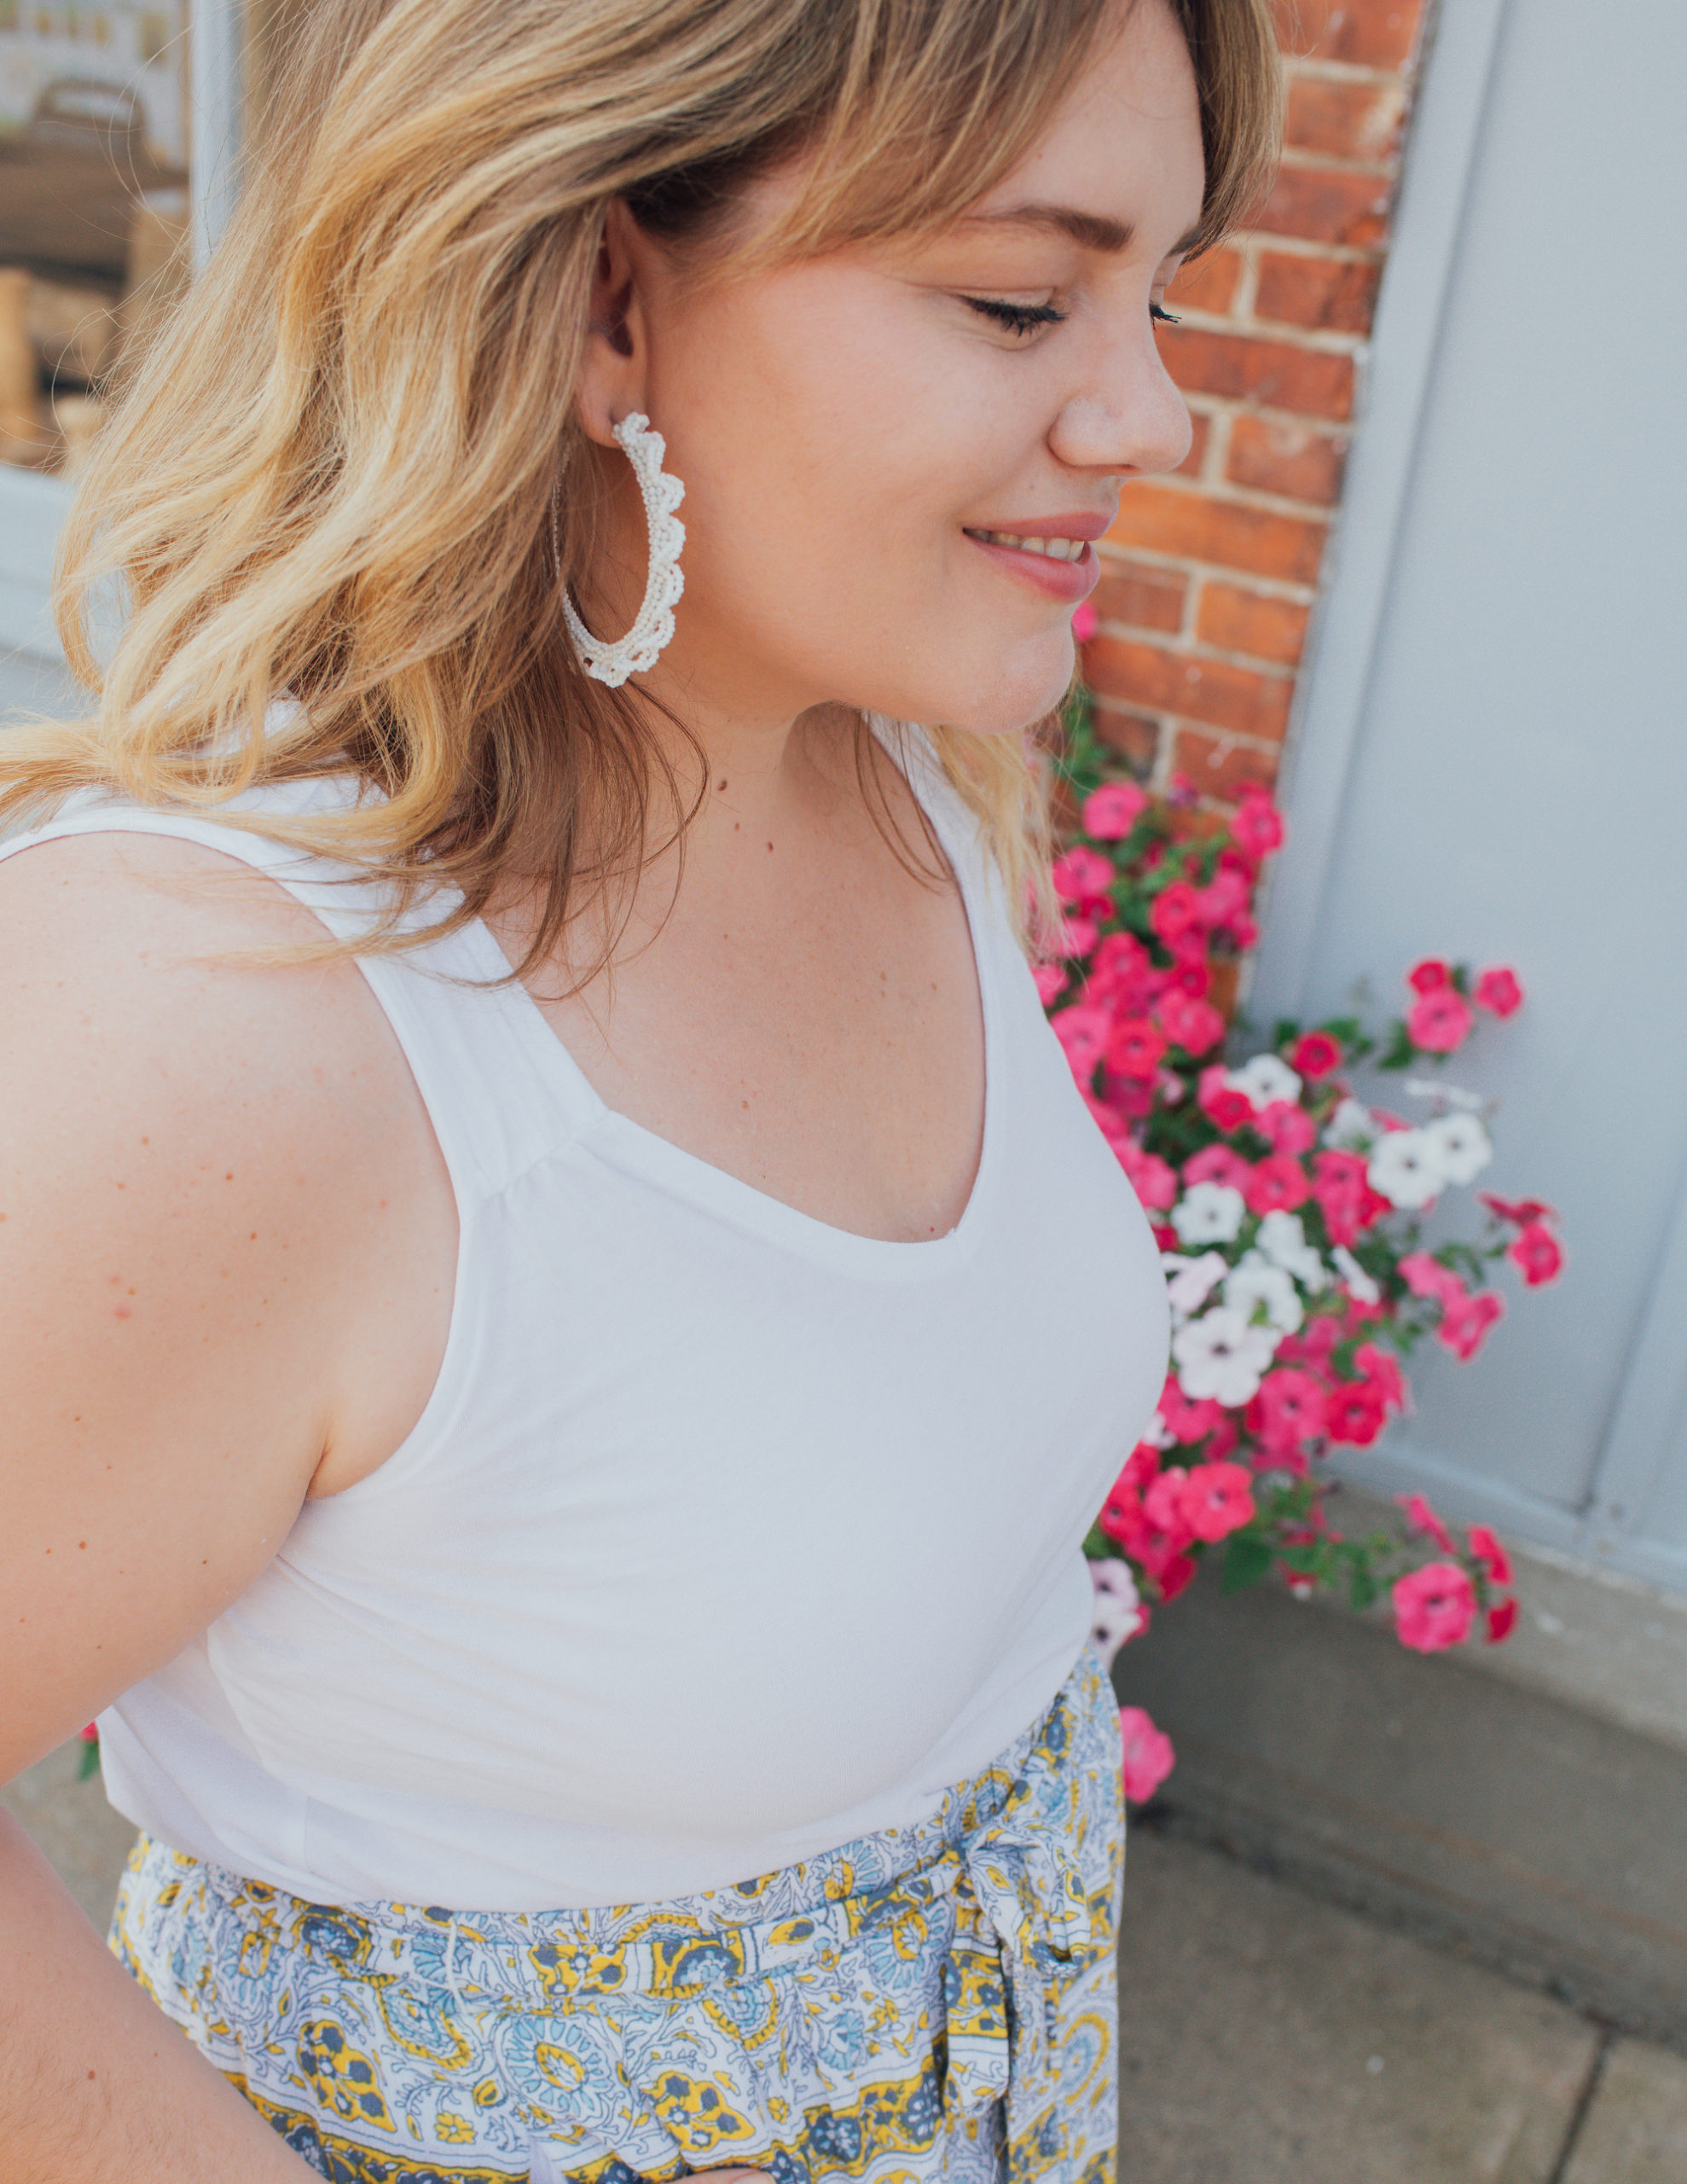 Sharing some cute summer skirts and tops! Now is the season to enjoy no outerwear and just go with a cute skirt and tank! 